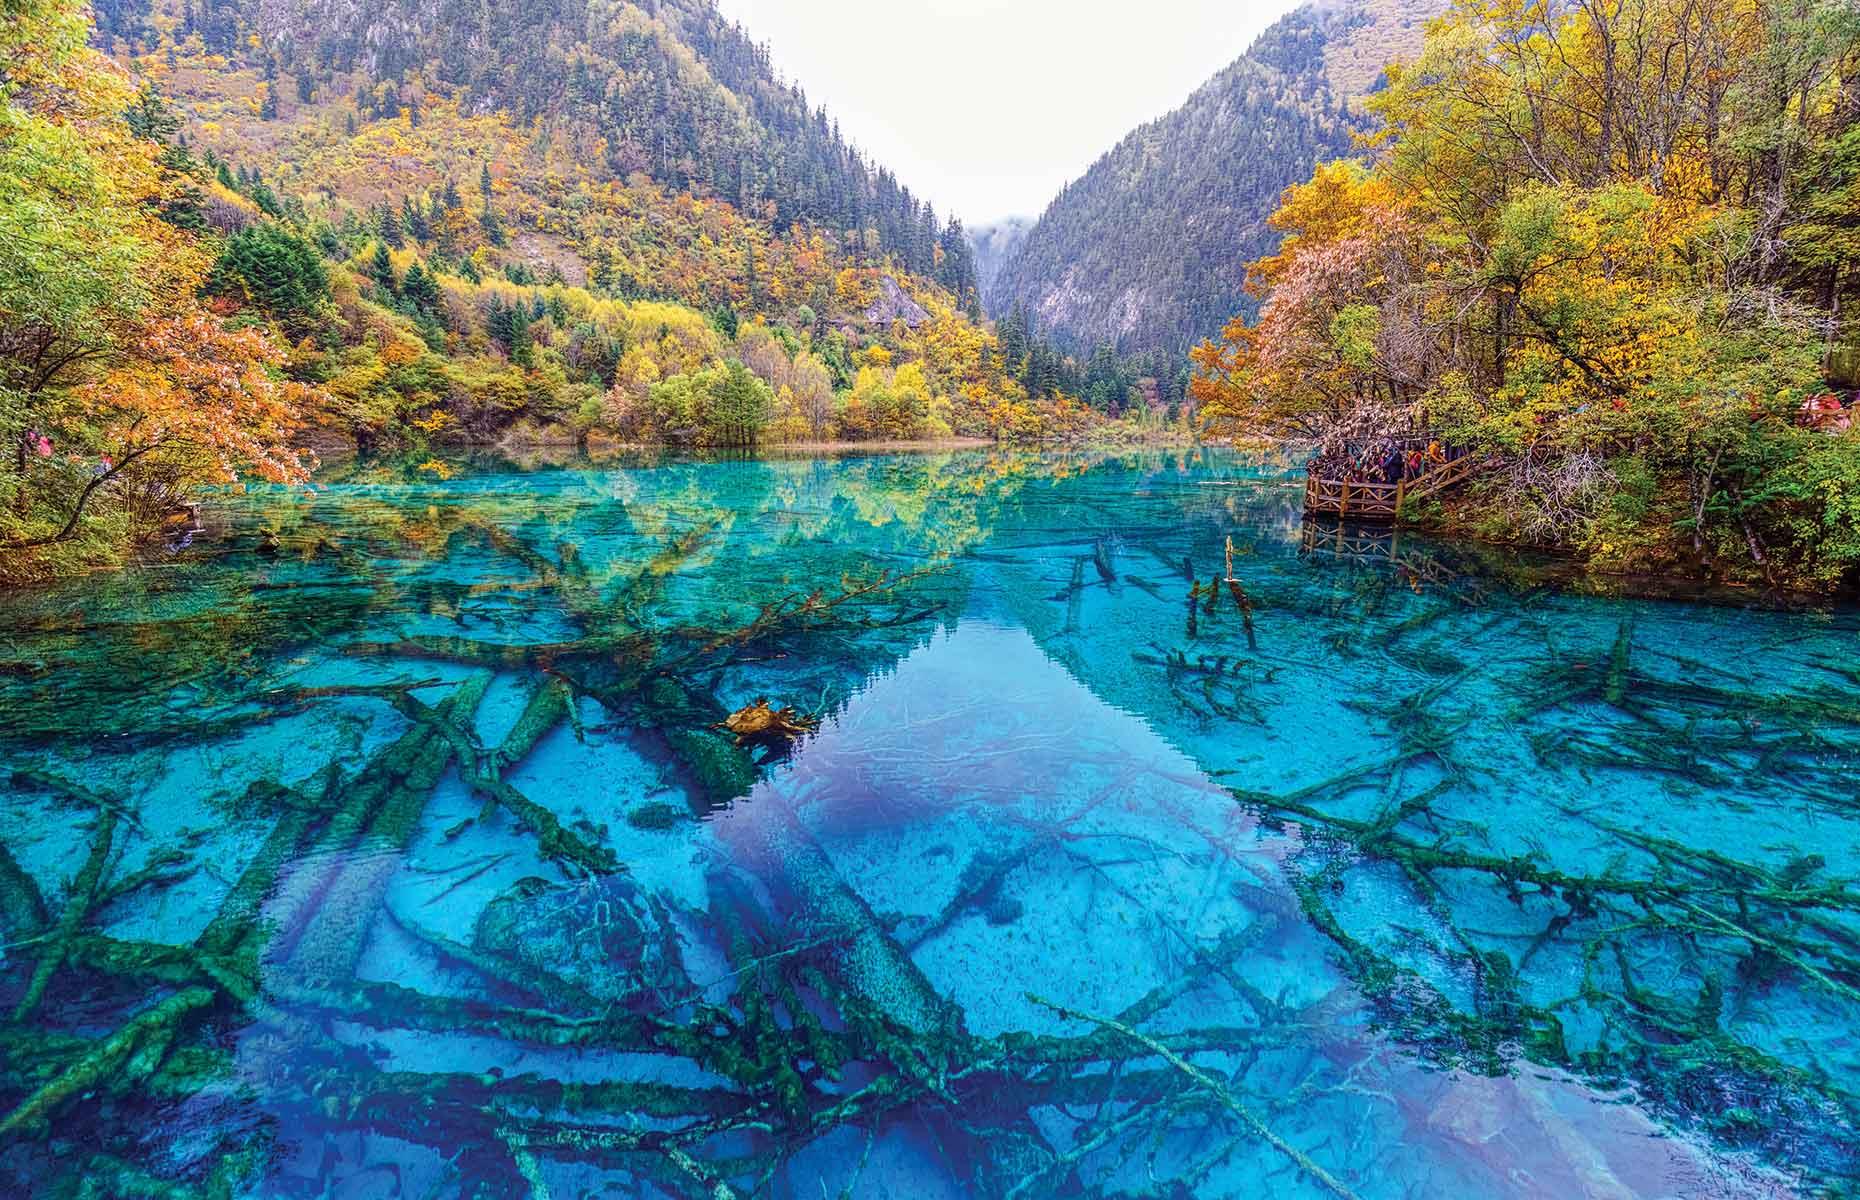 <p>Situated in the Min Mountains on the edge of the Tibetan Plateau in southwestern China, the Jiuzhaigou Nature Reserve is known for its hundred clear-water lakes, where mineral deposits color the water blue, green or turquoise. The jagged mountains are forested with a mix of broadleaf and coniferous trees. </p>